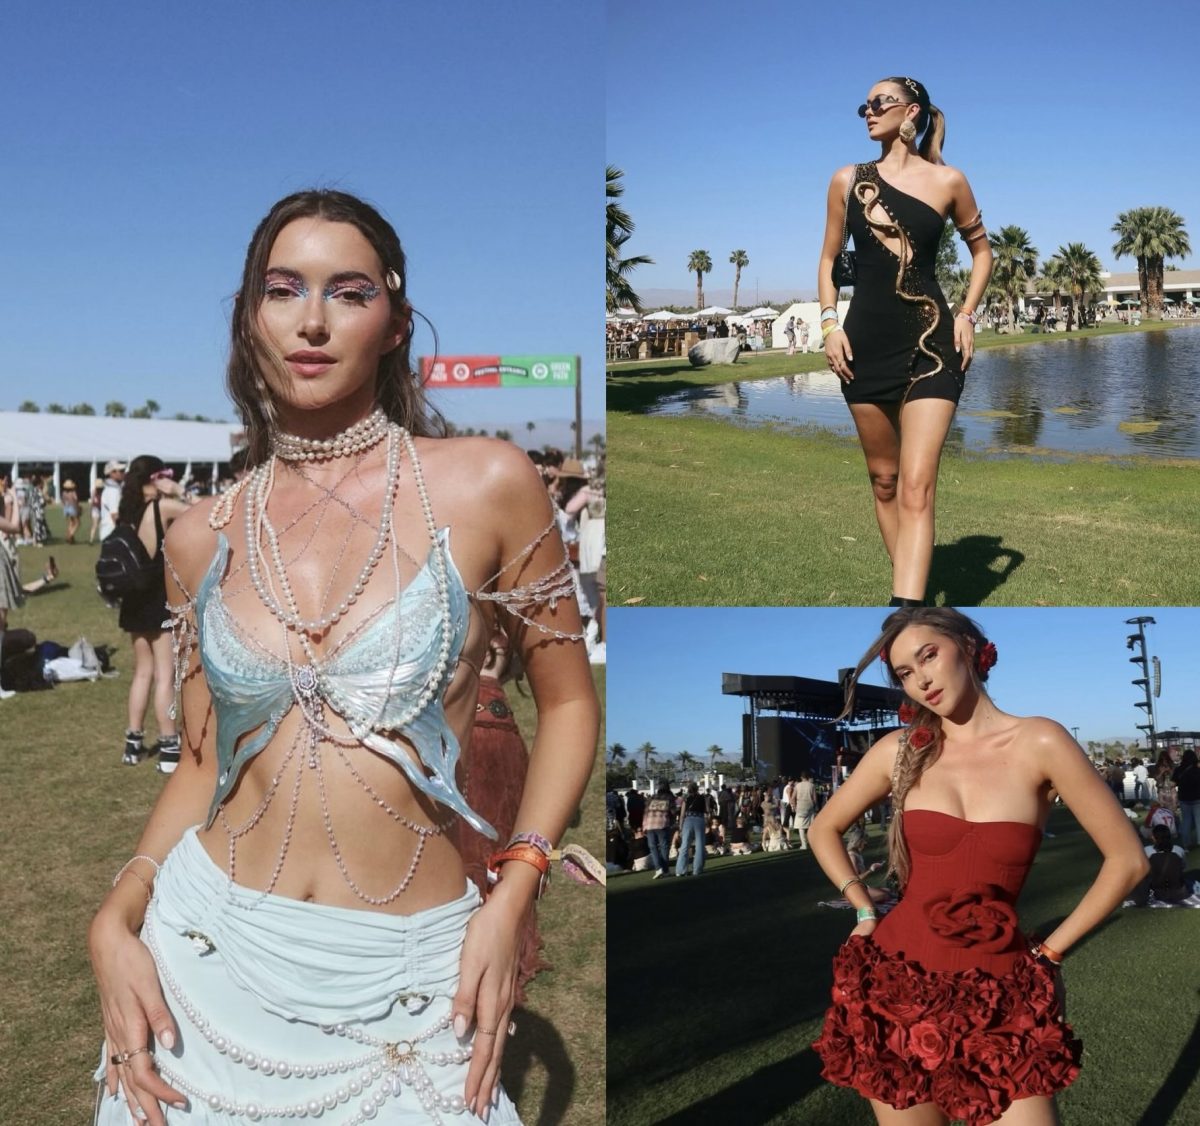 These are all of Madeleine Whites Coachella looks: the left is her day one mermaid look, the top right is her day two snake look, and the bottom right is her day three rose look.